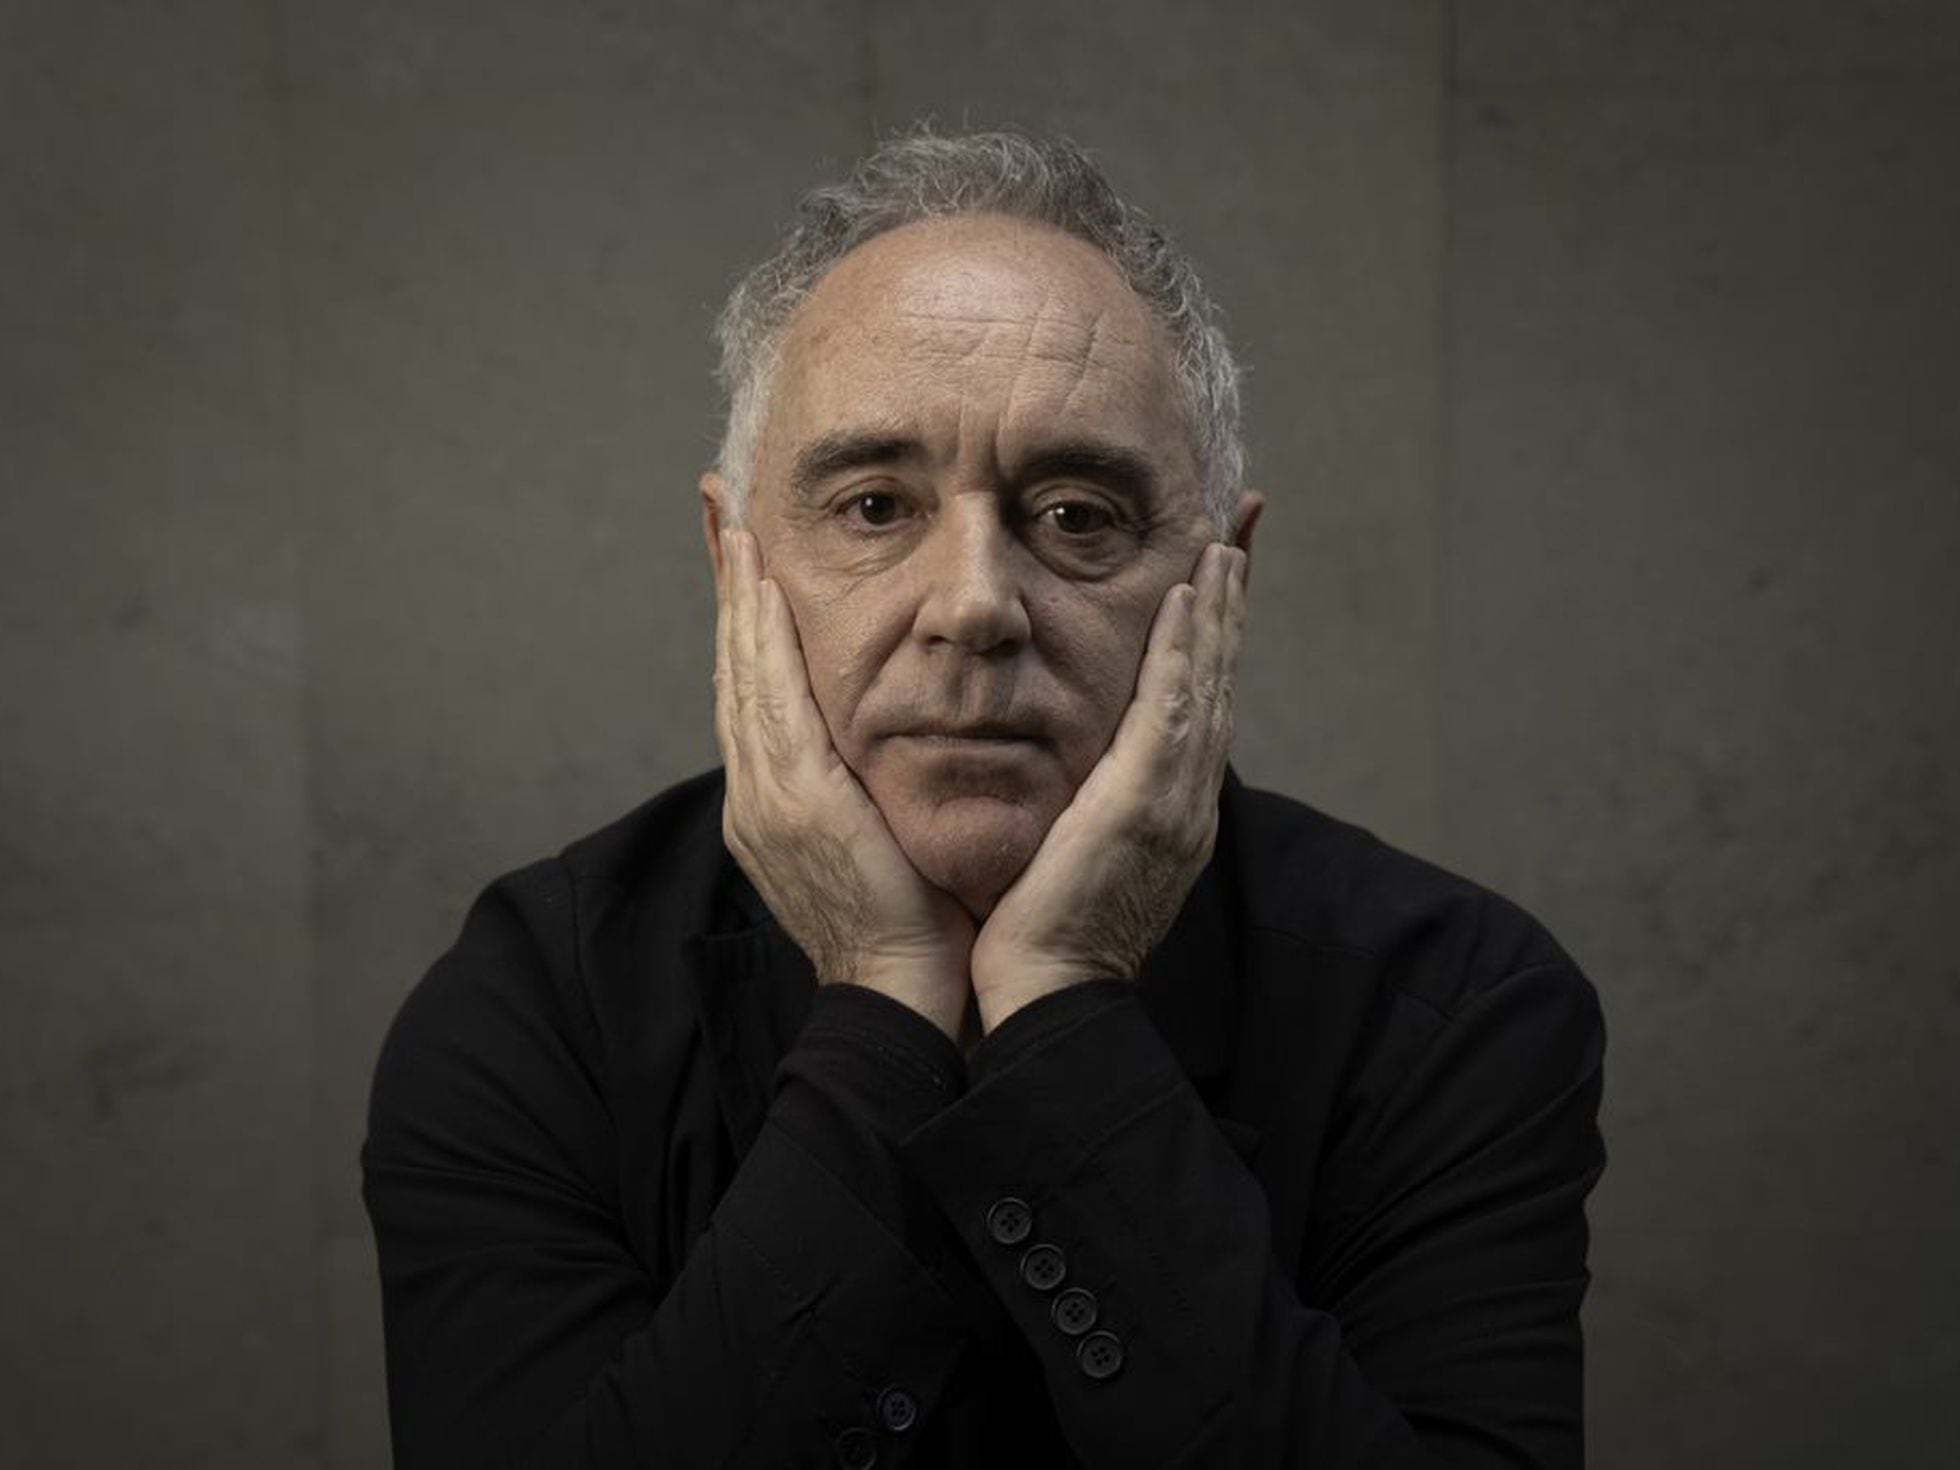 Ferran Adrià: 'If elBulli had stayed open, I could have hit rock